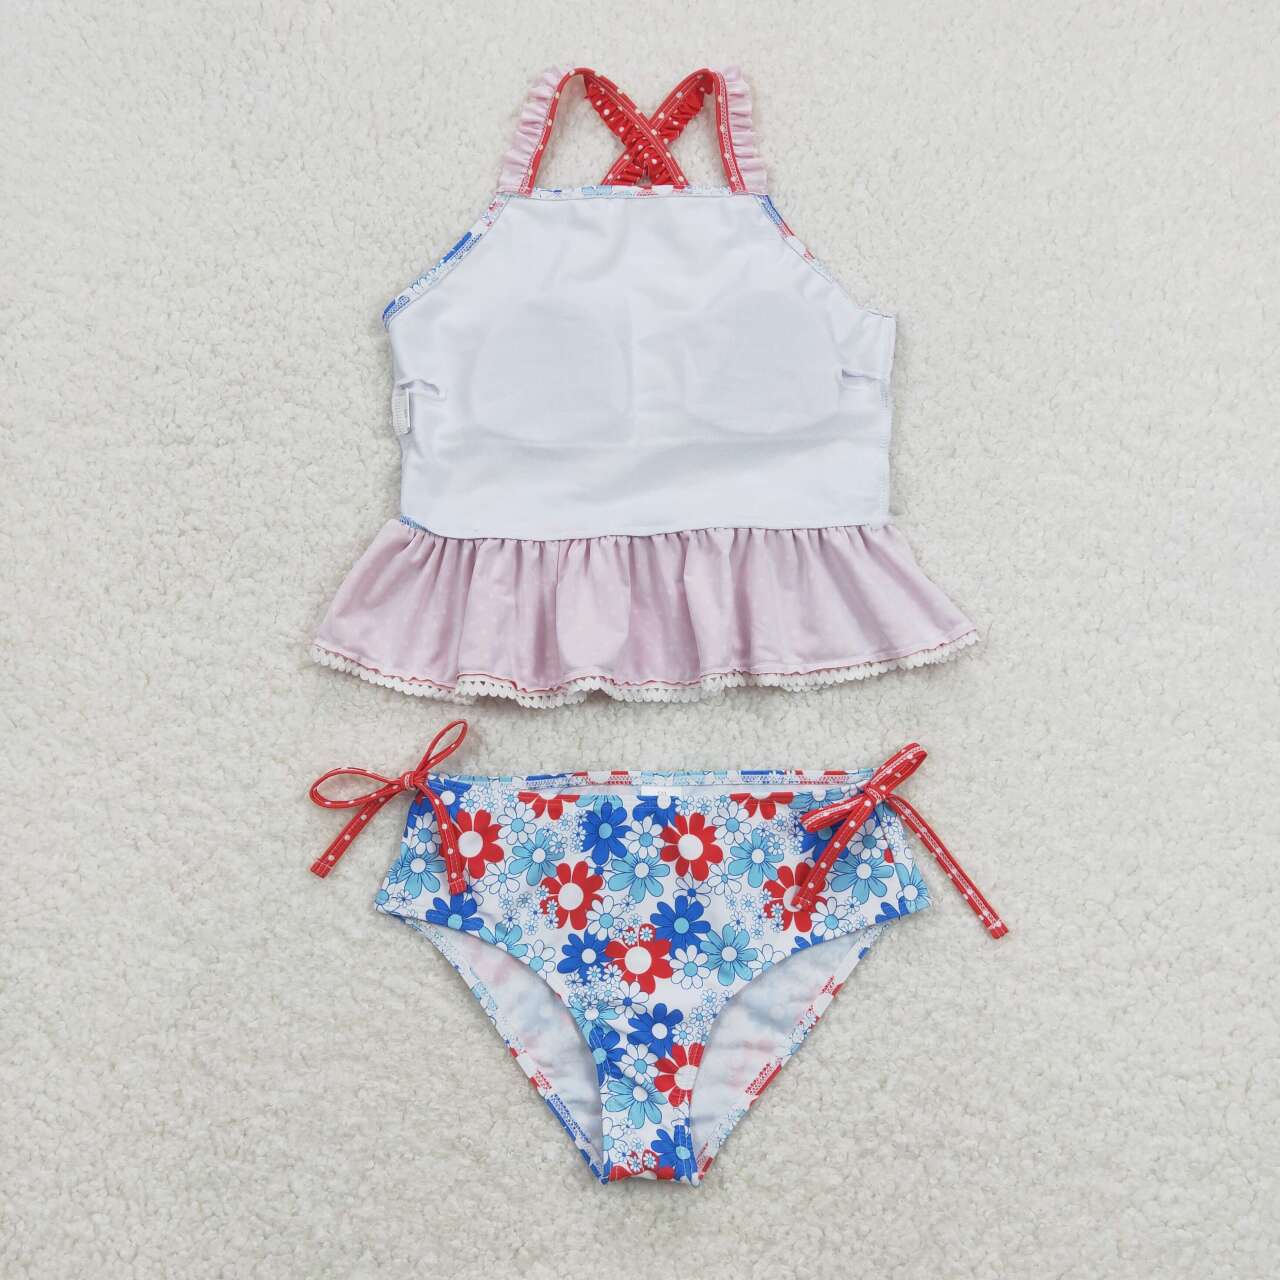 S0253 Flowers Print Girls 2 Pieces 4th of July Swimsuits